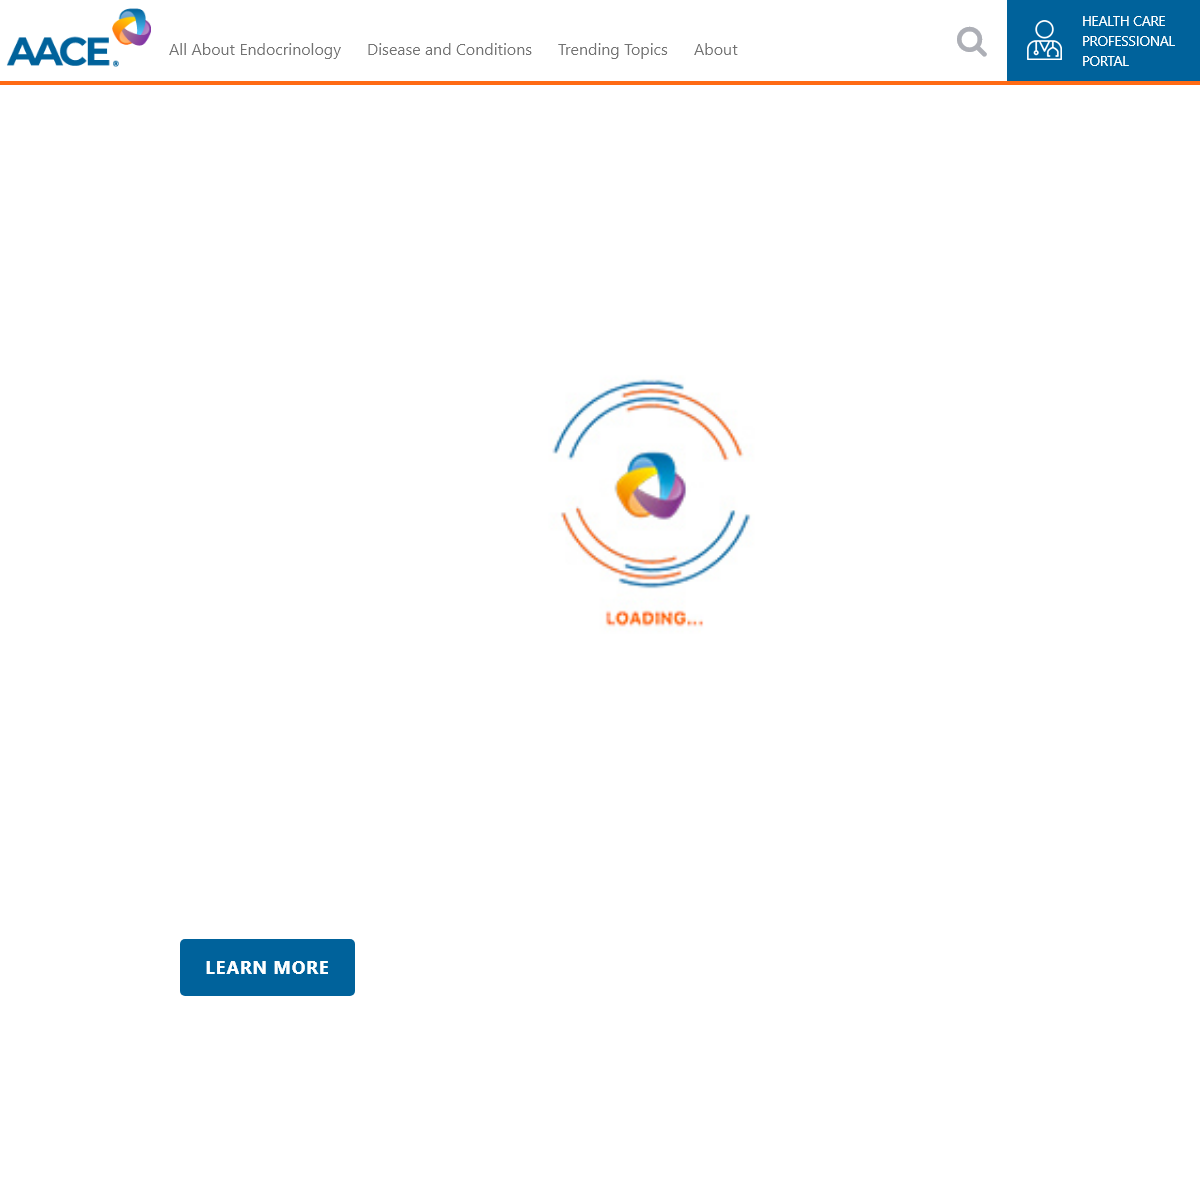 A complete backup of aace.com